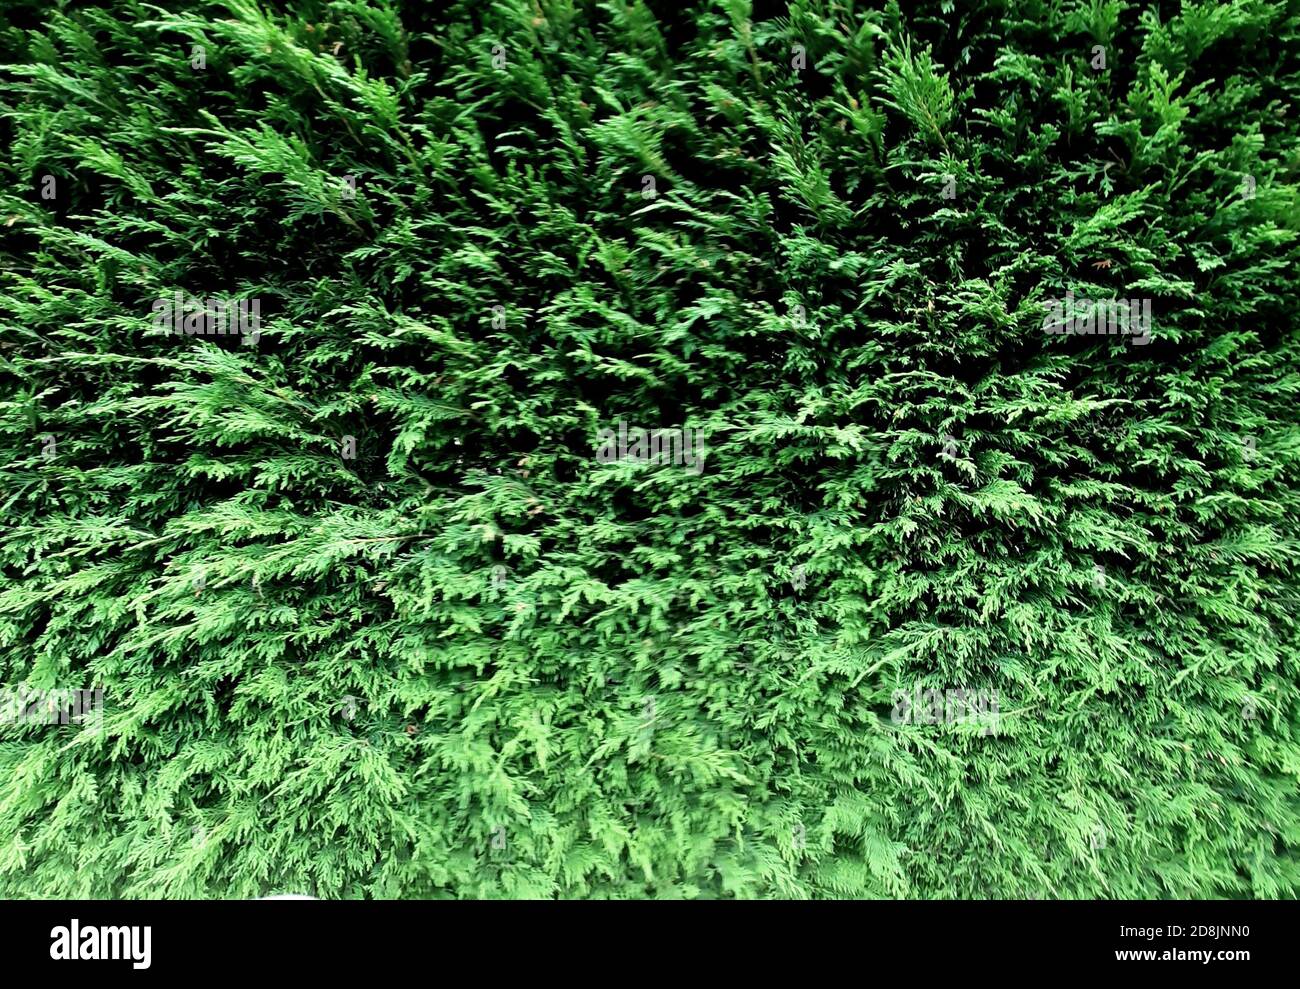 A full frame background image of lush green fir hedge or hedge row with copy space Stock Photo